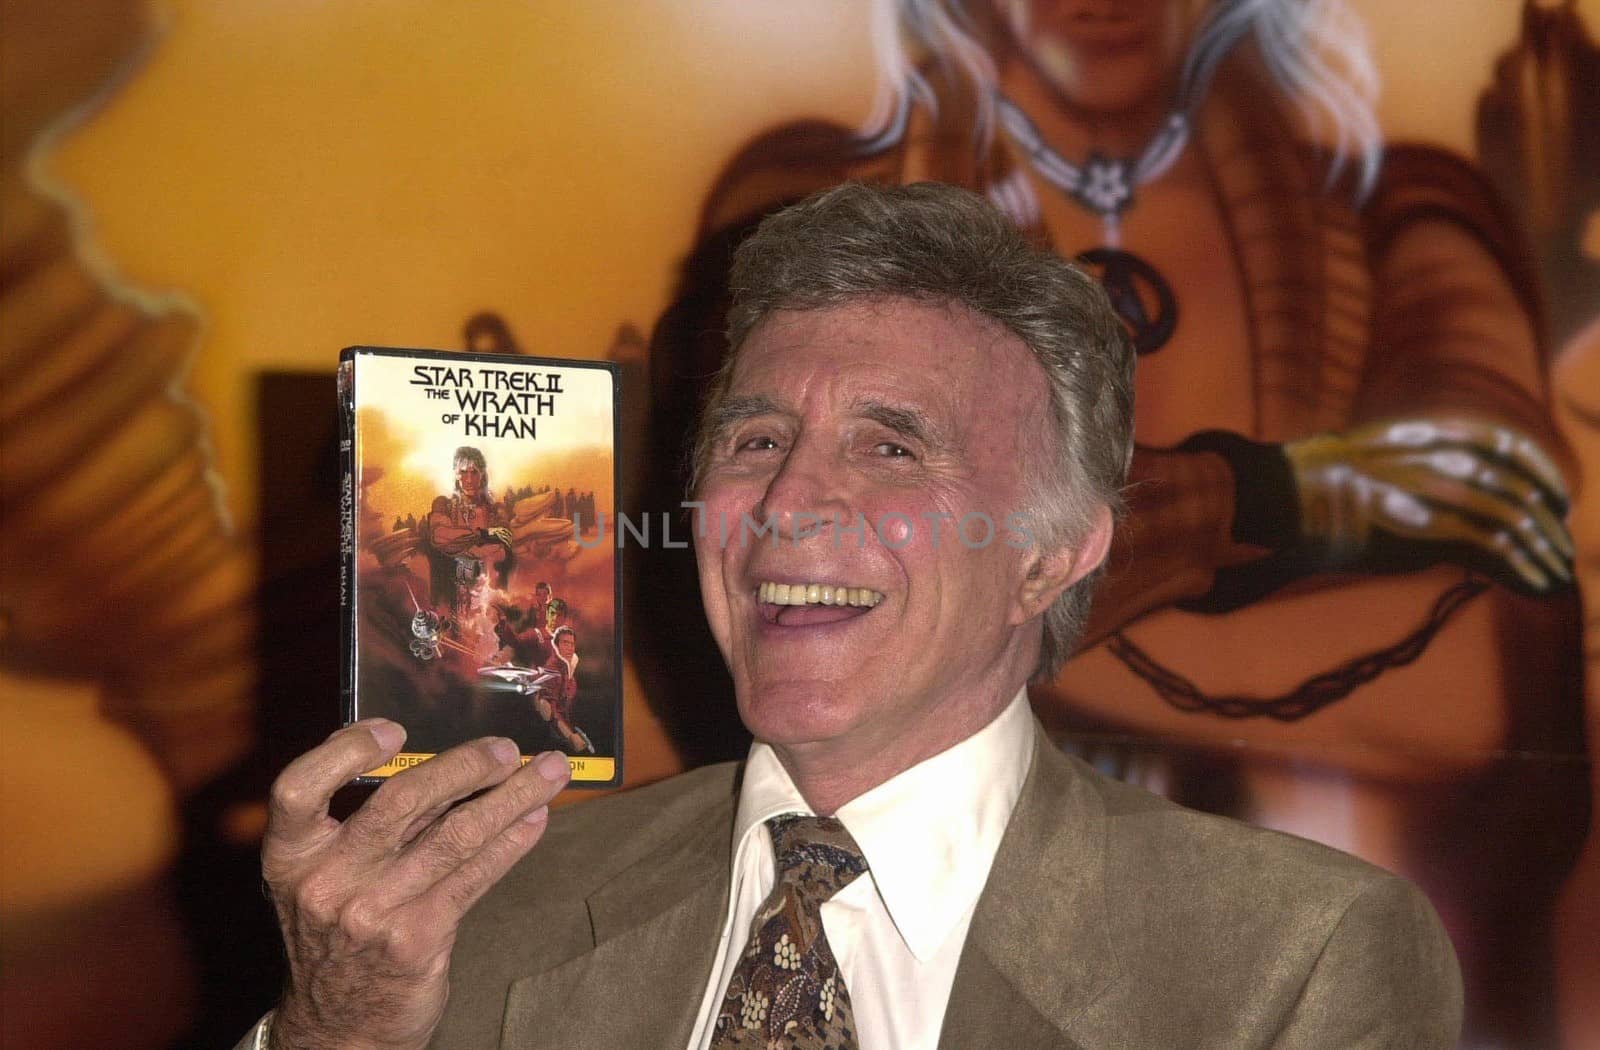 Ricardo Montalban makes an appearance in Universal City in honor of "Star Trek The Wrath Of Khan" DVD release. 07-11-00